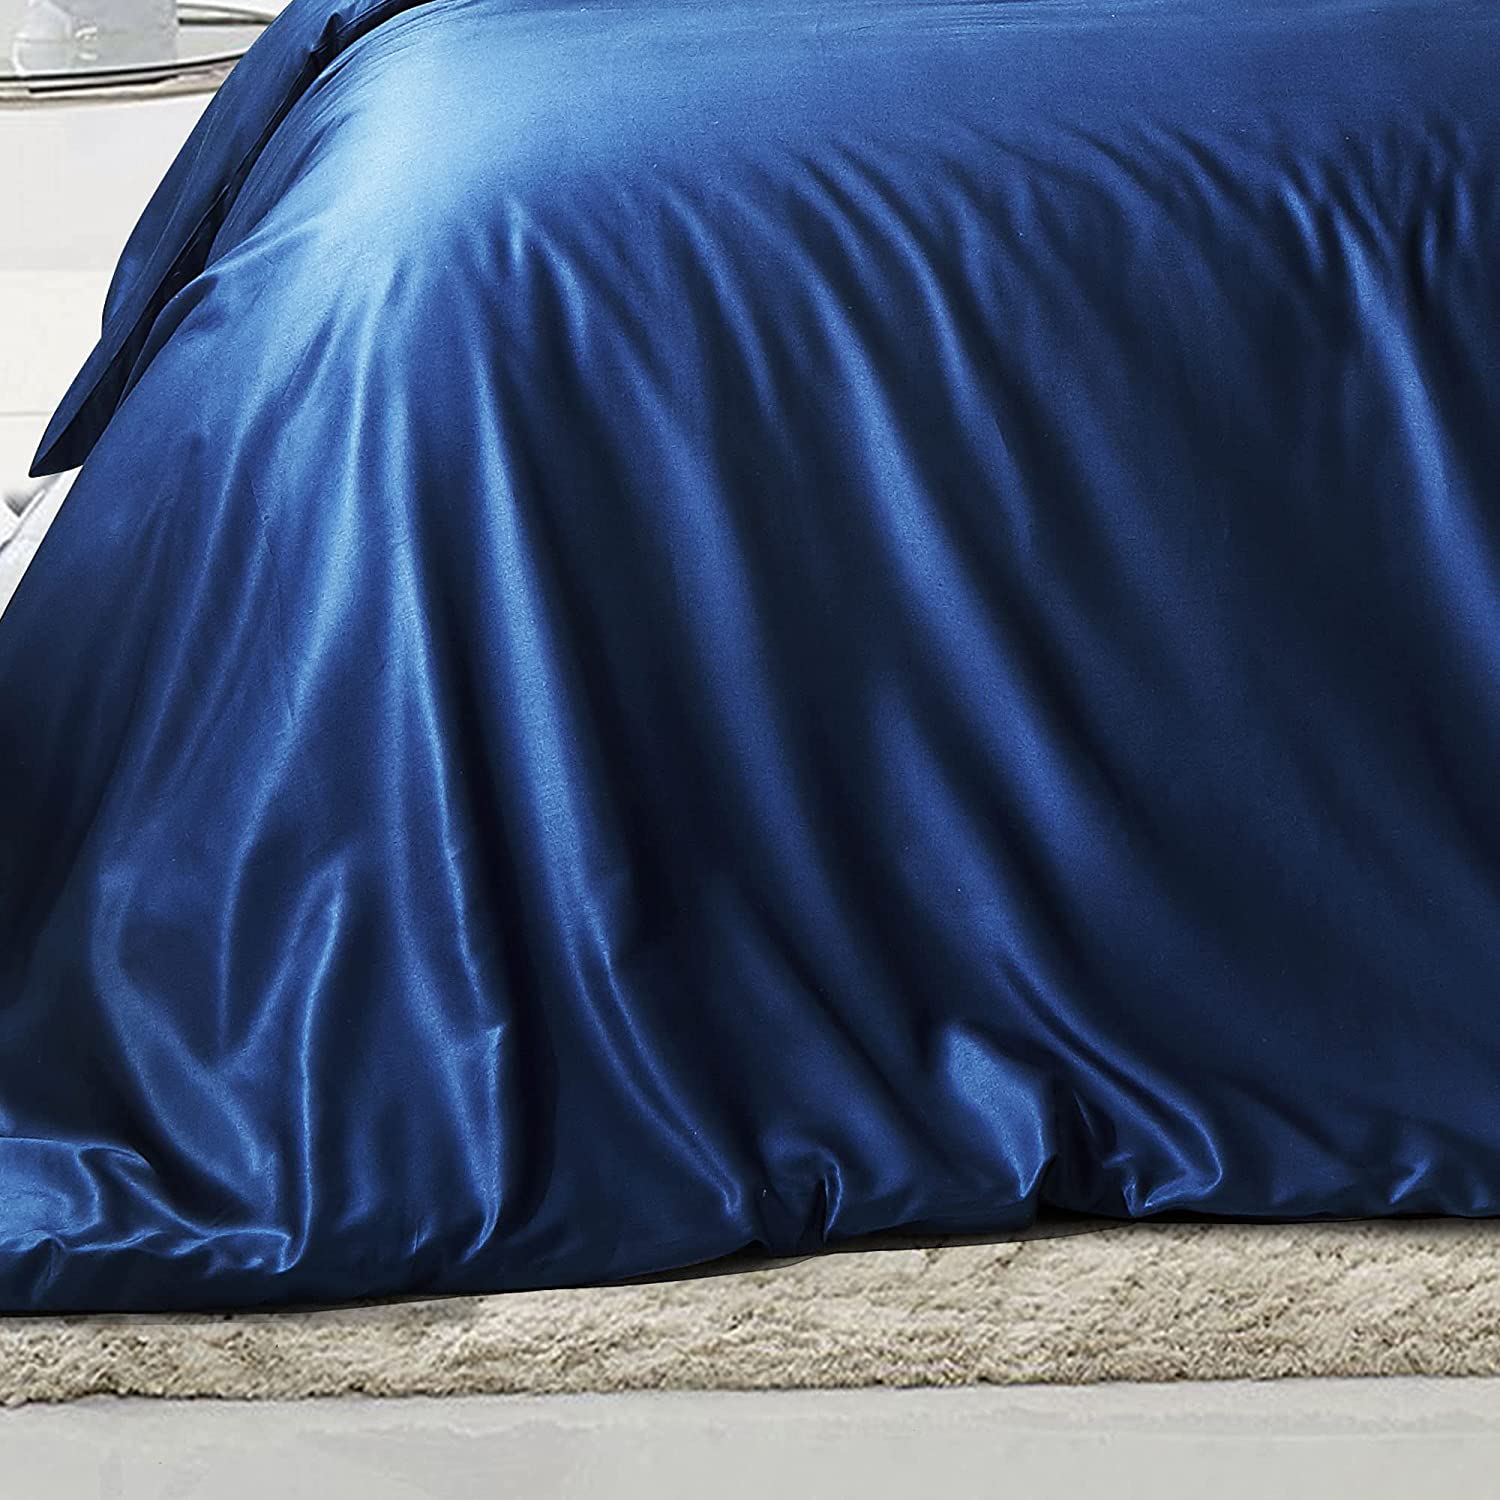 Luxton Navy Blue 100% Organic Bamboo Quilt Cover Set